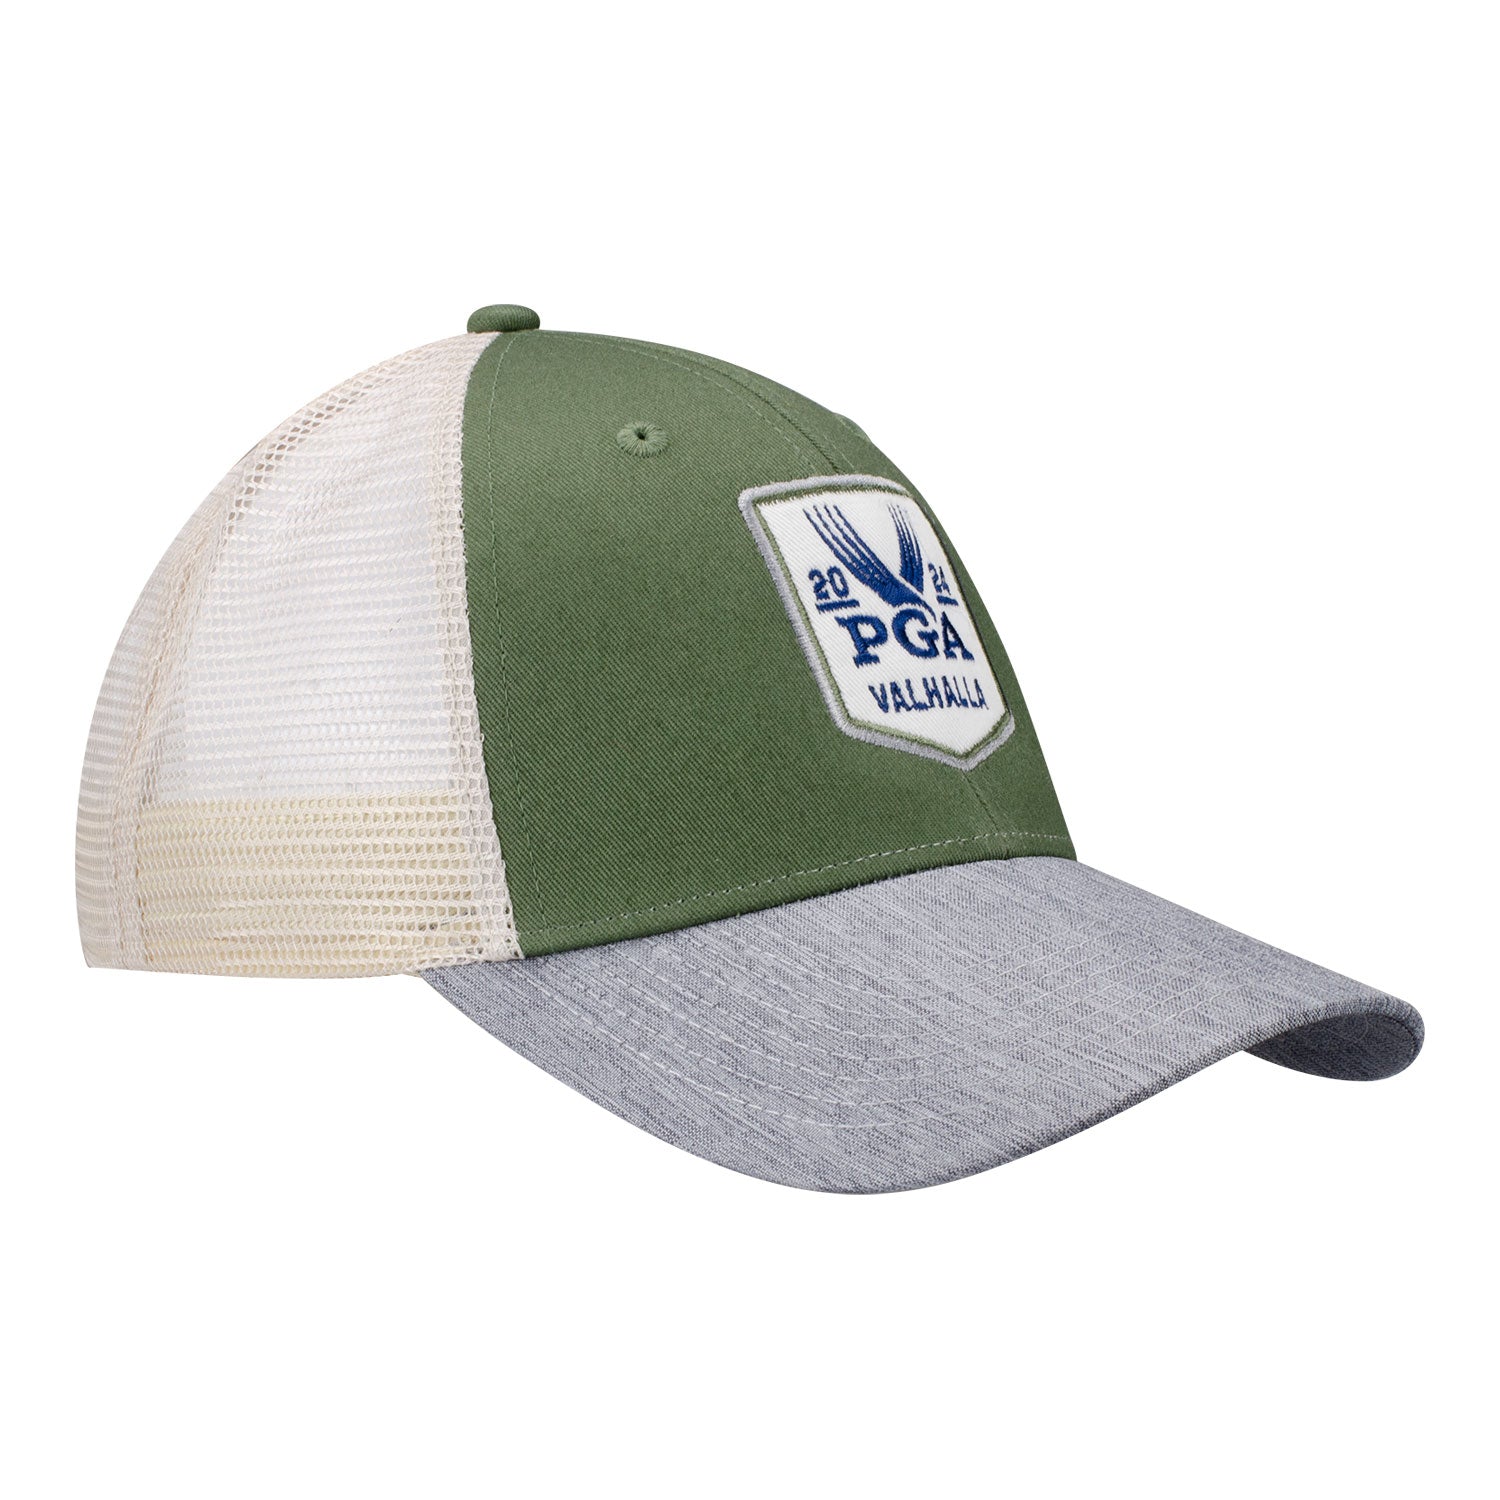 Ahead 2024 PGA Championship Classic - Fit Mesh Back Adjustable Hat in Olive / Carbon / Tan - Front Left View